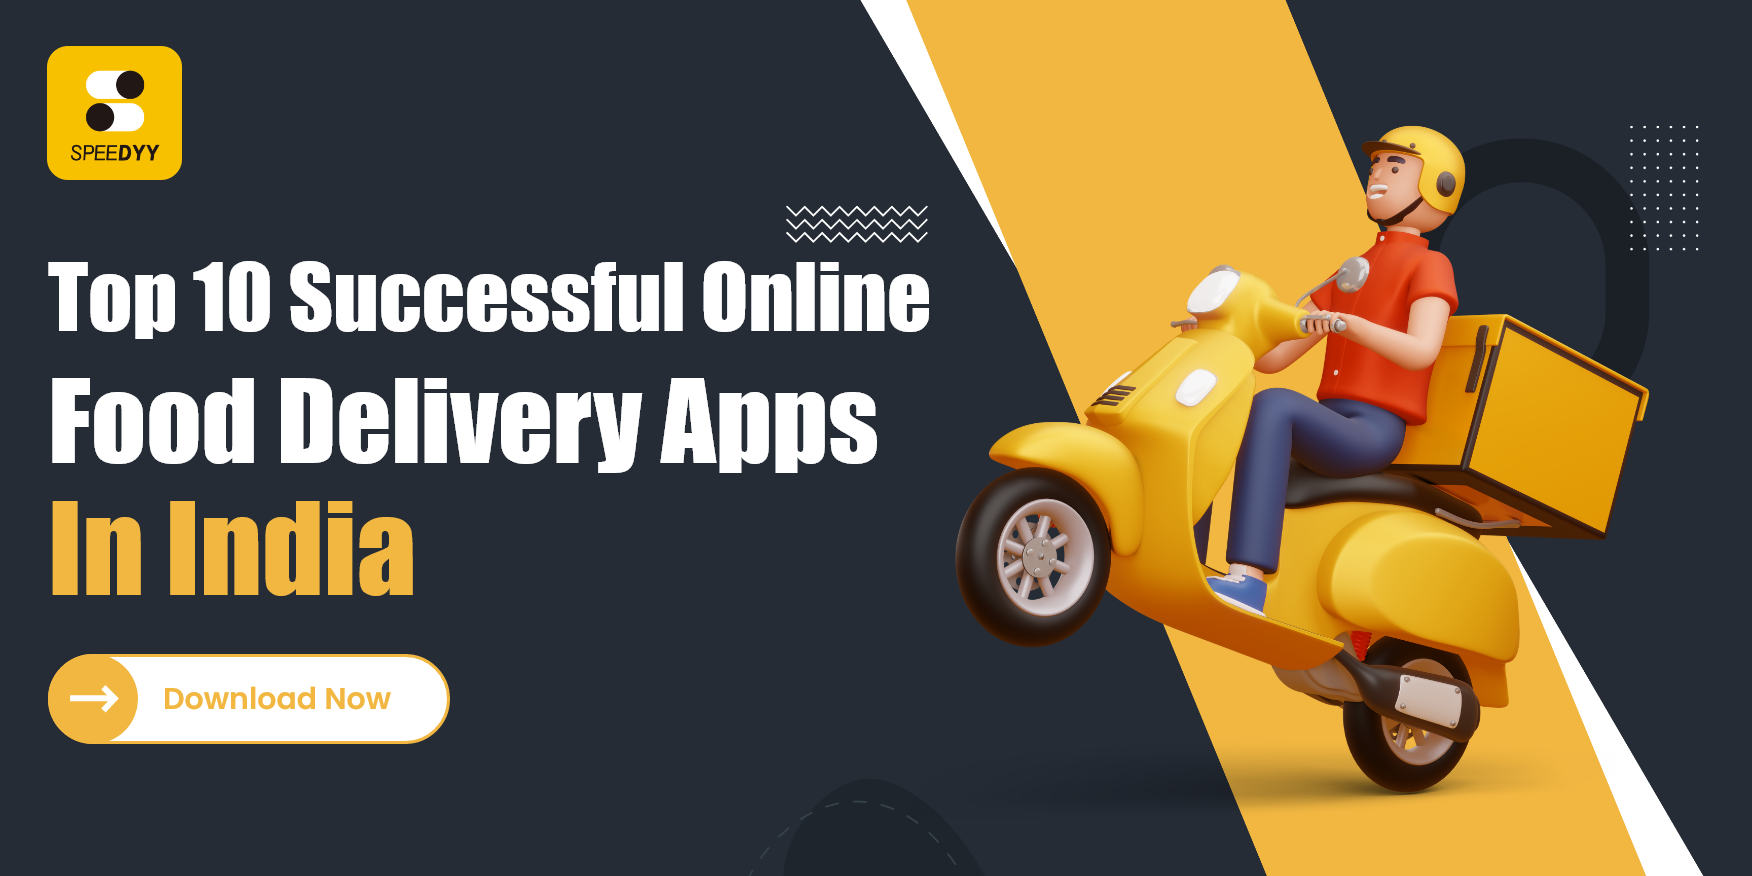 Online Food Delivery Apps